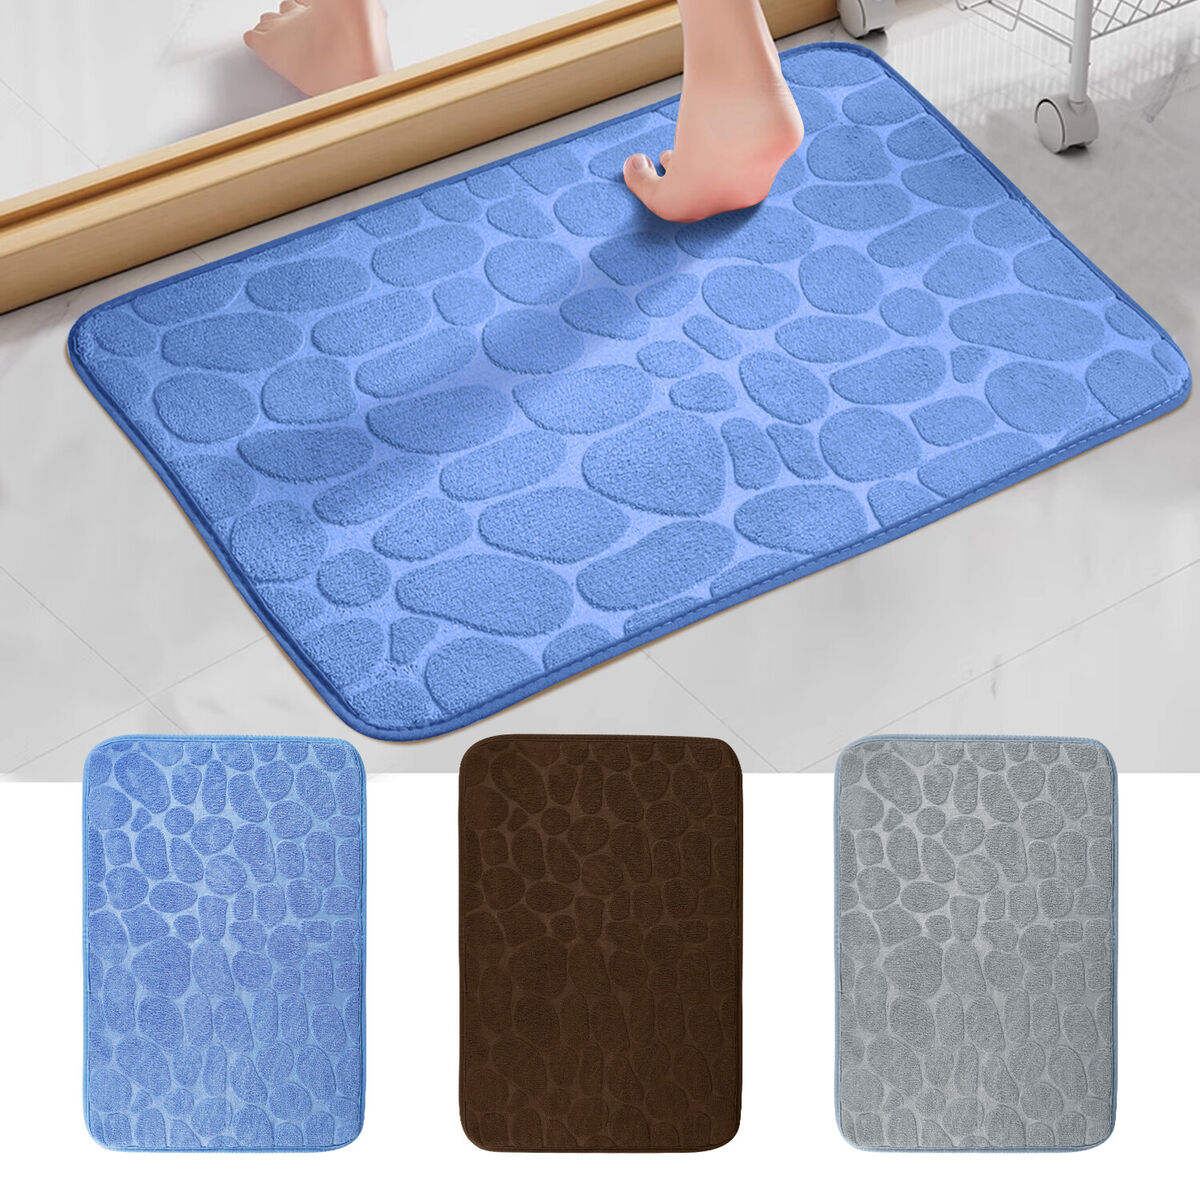 Thickened Bath Mat, Foot Wiping Mat, 23.6 x 15.7 x 1.2 inches, Quick  Drying, Absorbent, Anti-Slip, Fluffy, Antibacterial, Odor Resistant,  Entrance